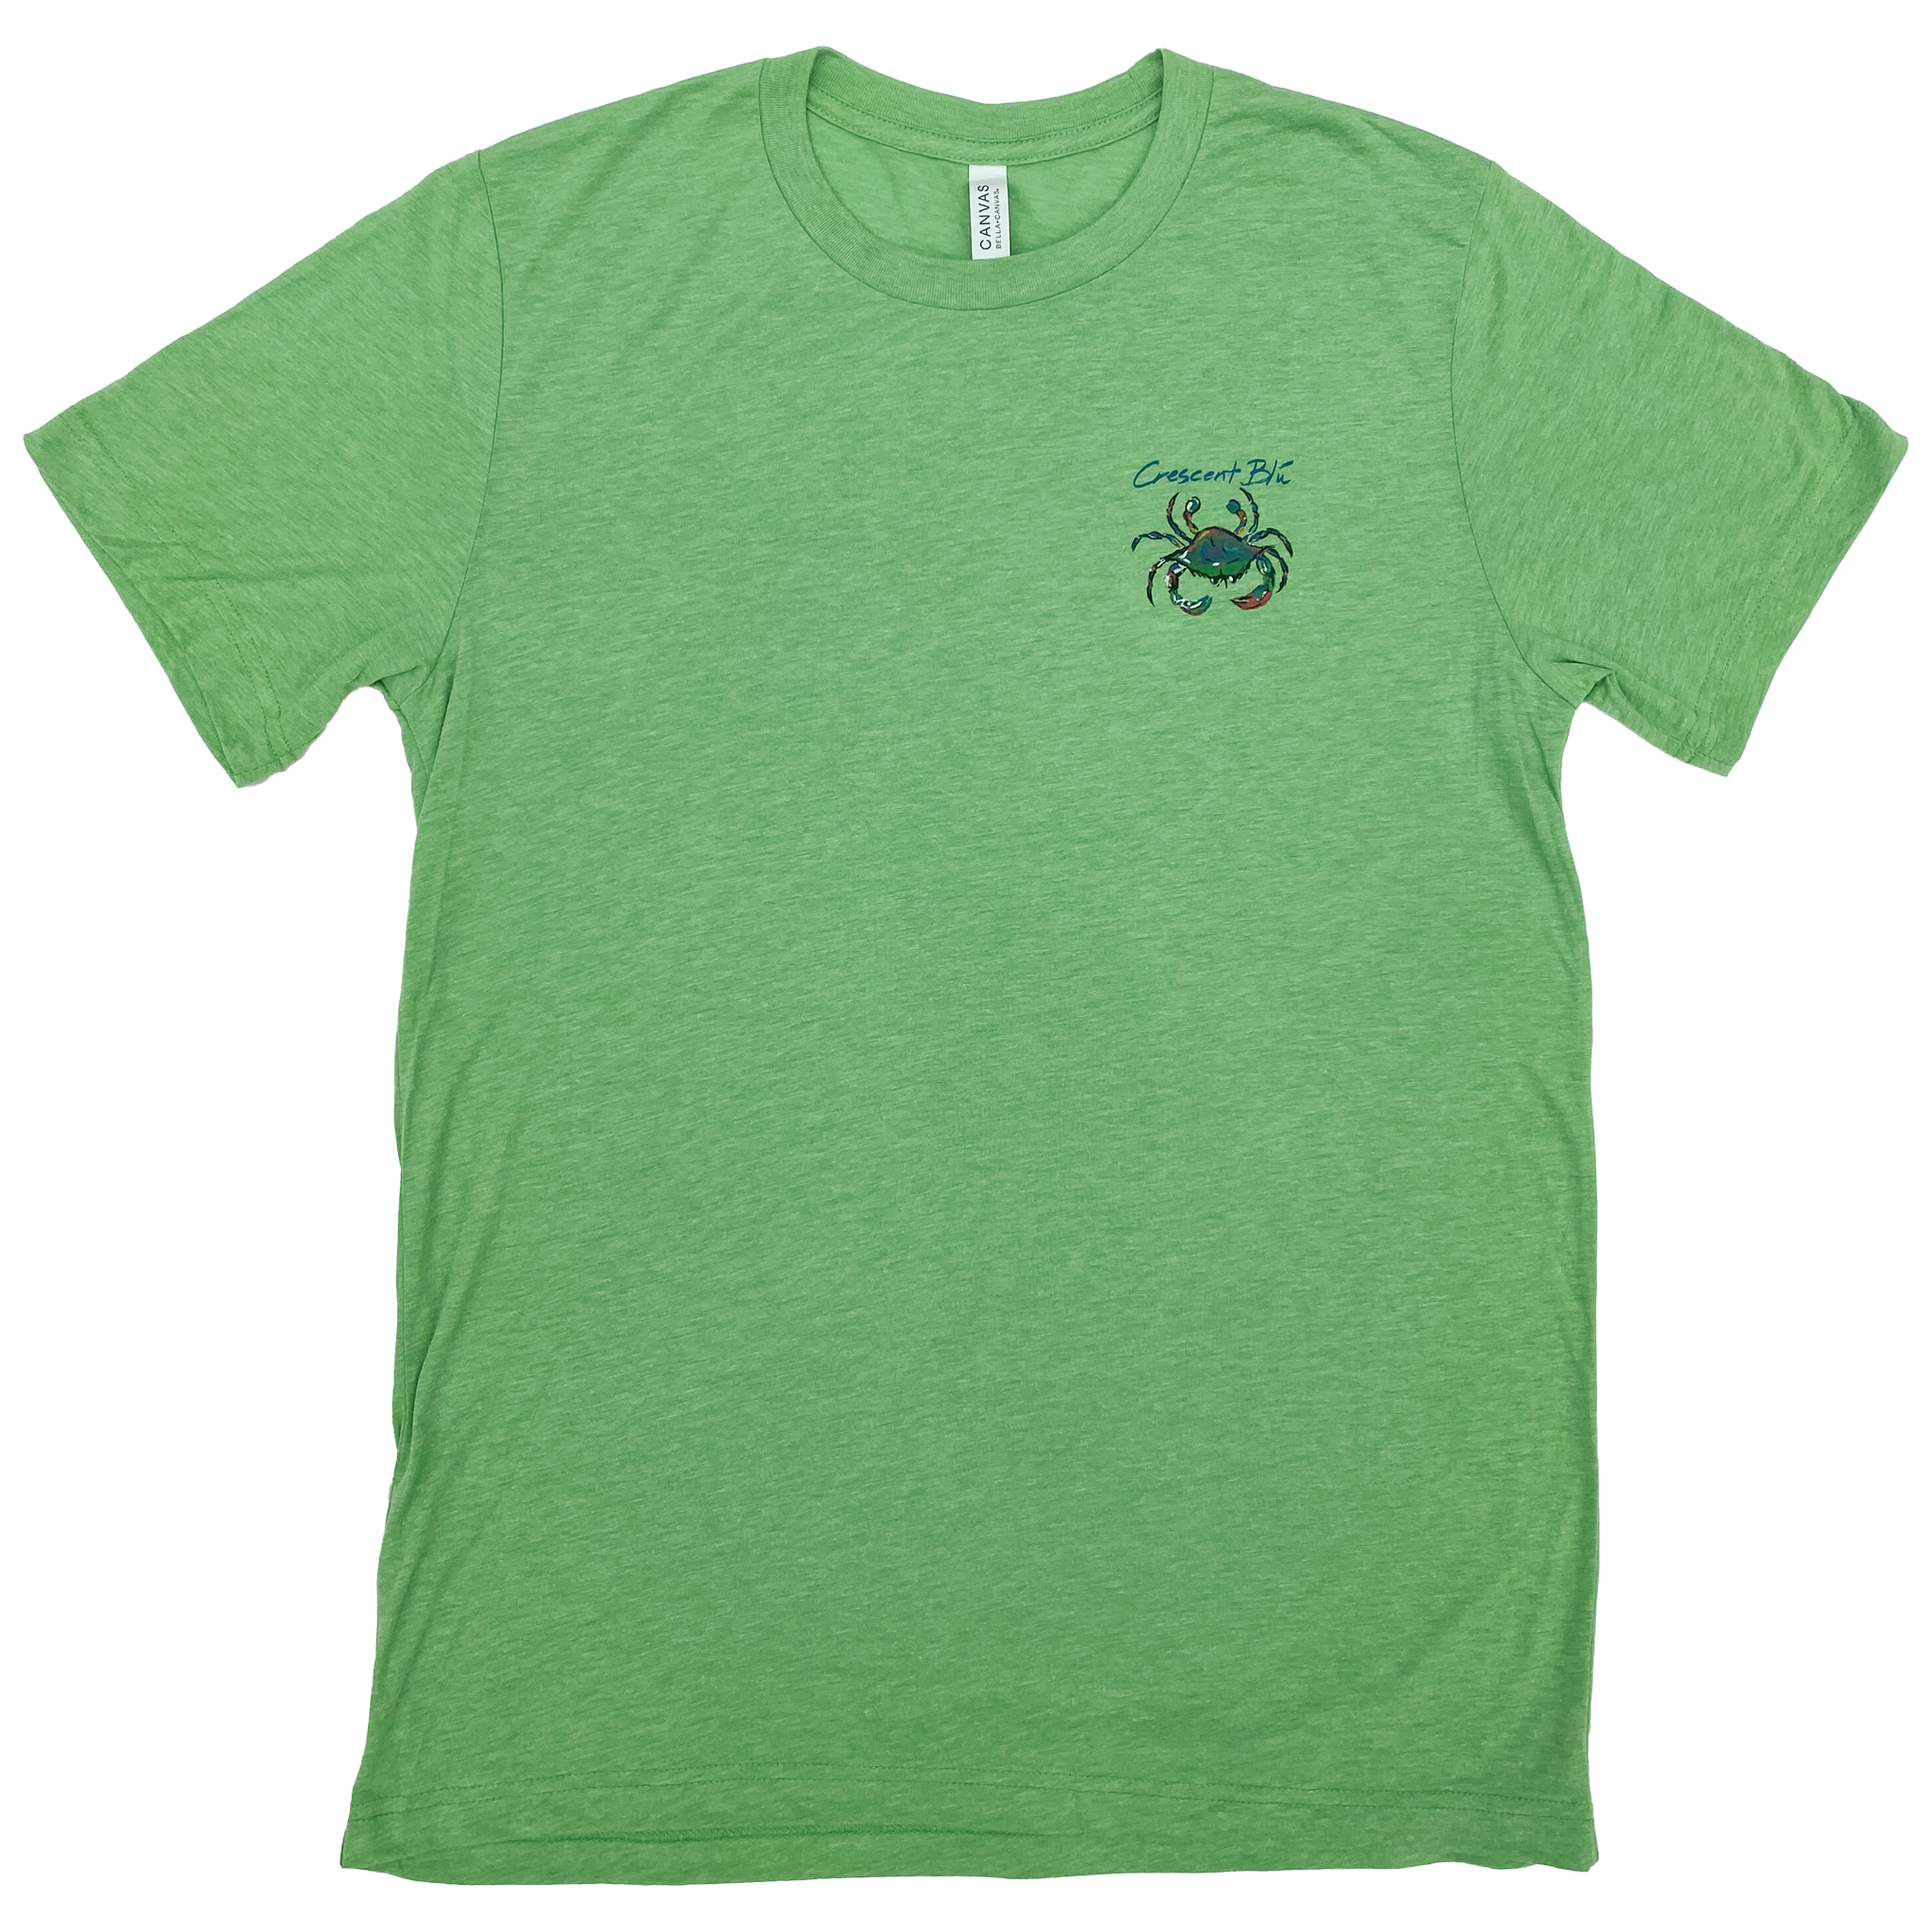 Front view of adult short sleeve tee with small multi-colored Crescent Blu crab logo on front left chest. Green color triblend shirt